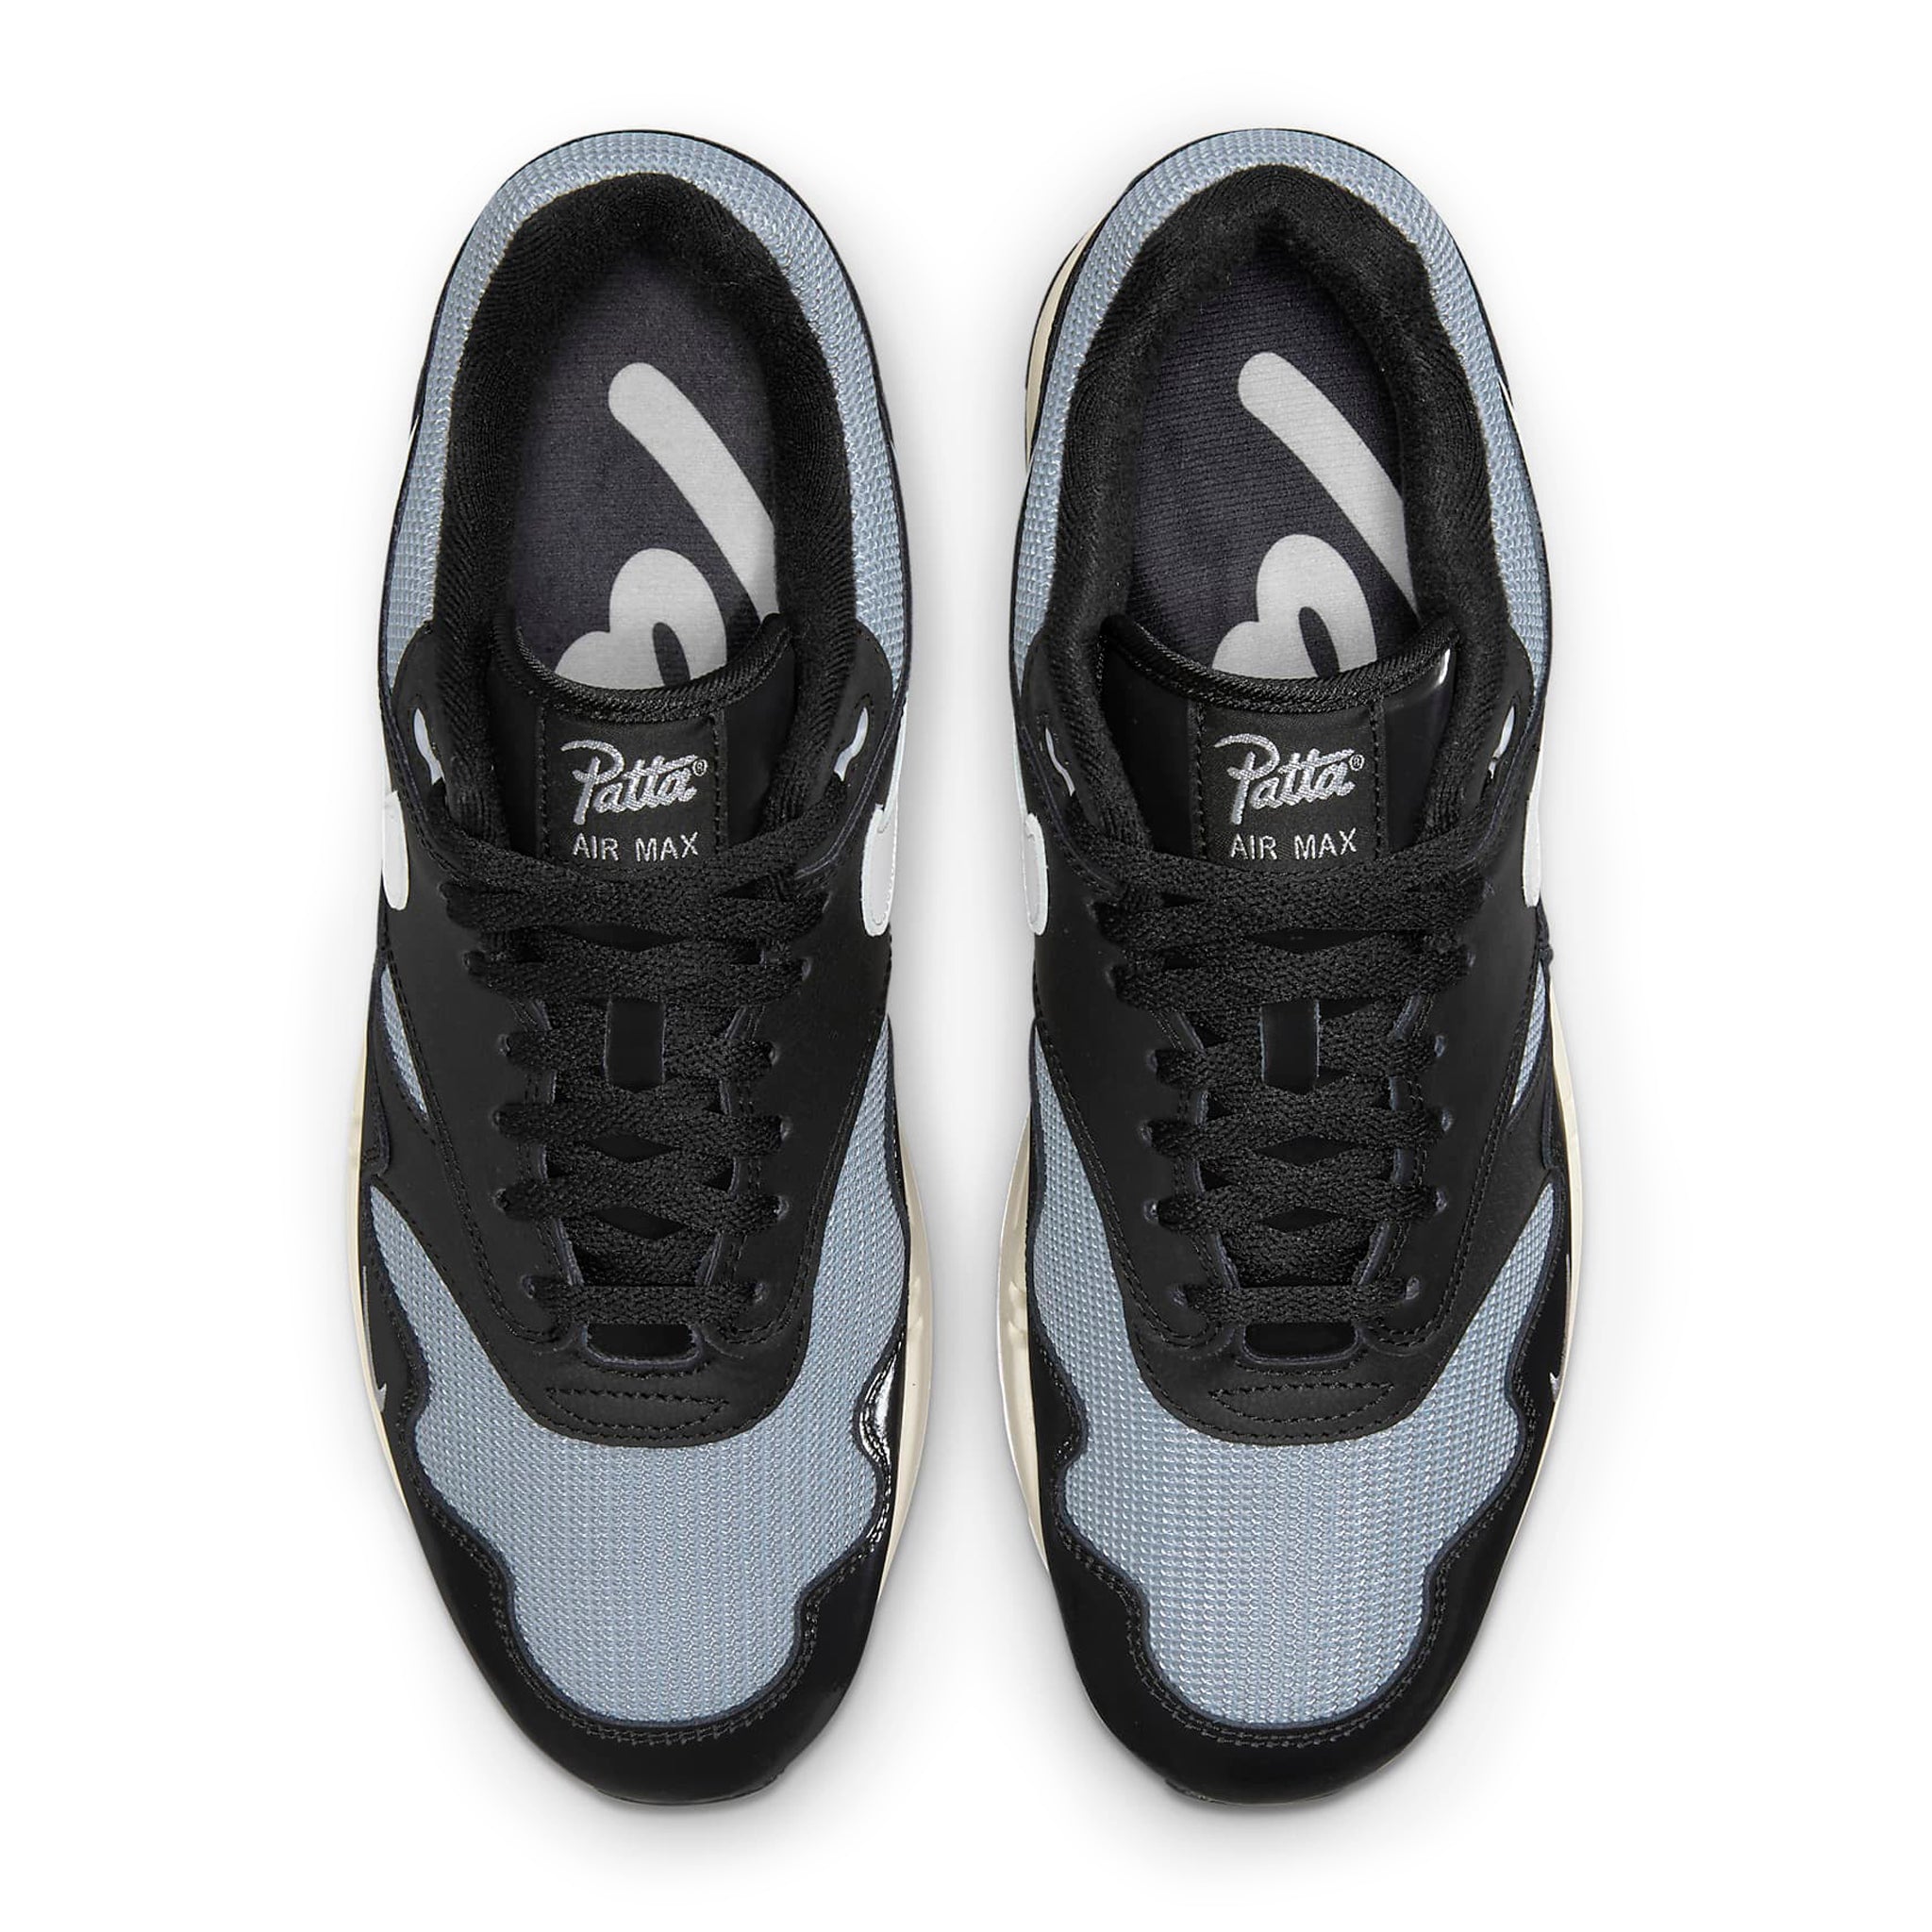 Top down view of Nike Air Max 1 Patta Waves Black (With Bracelet) DQ0299-001